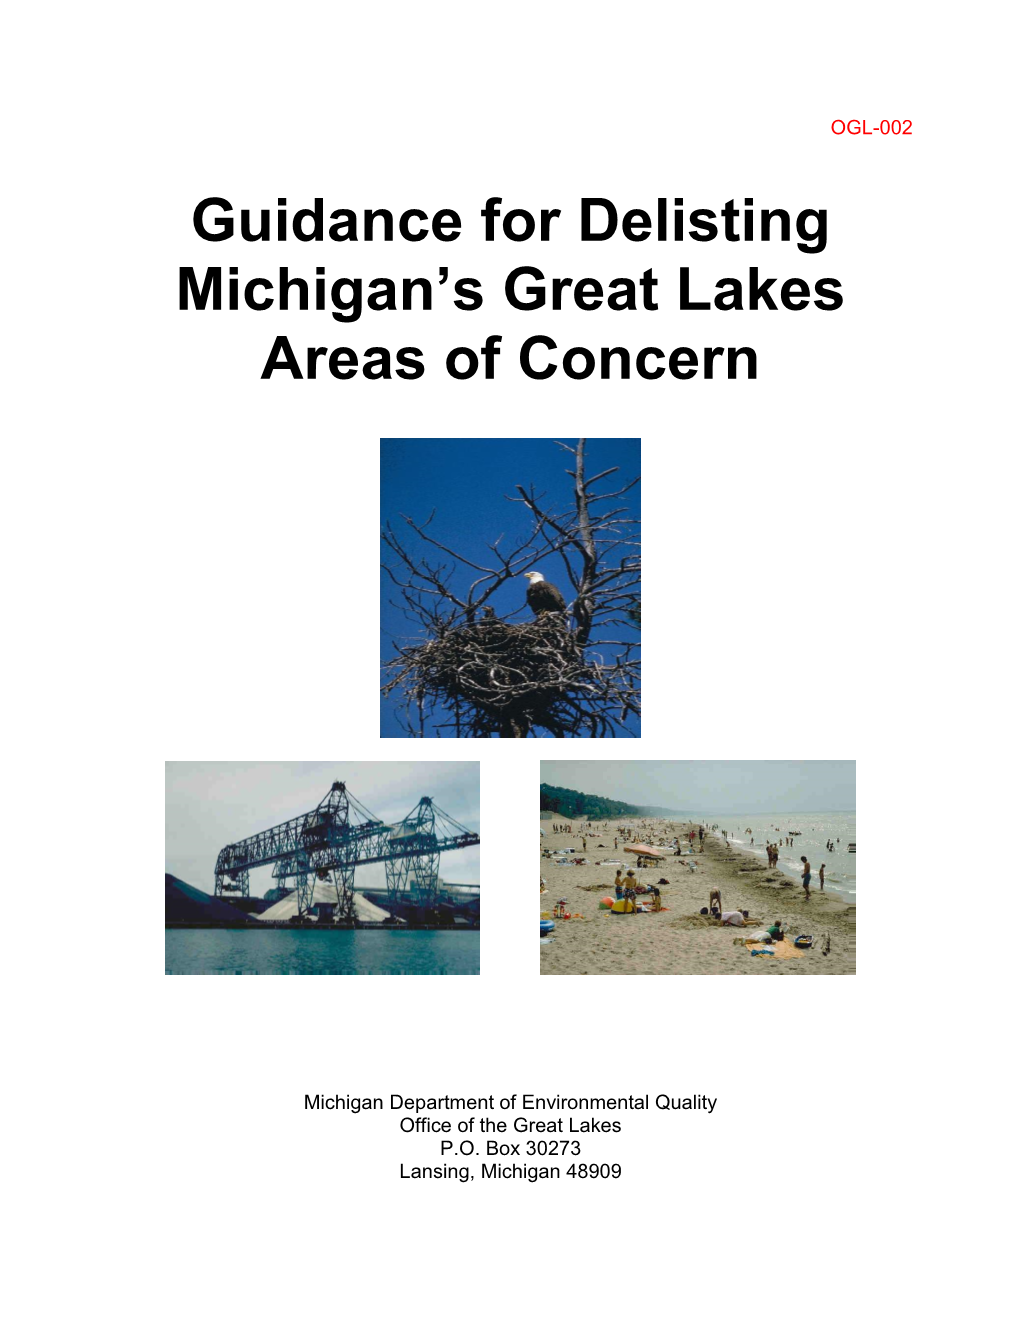 Guidance for Delisting Michigan's Great Lakes Areas